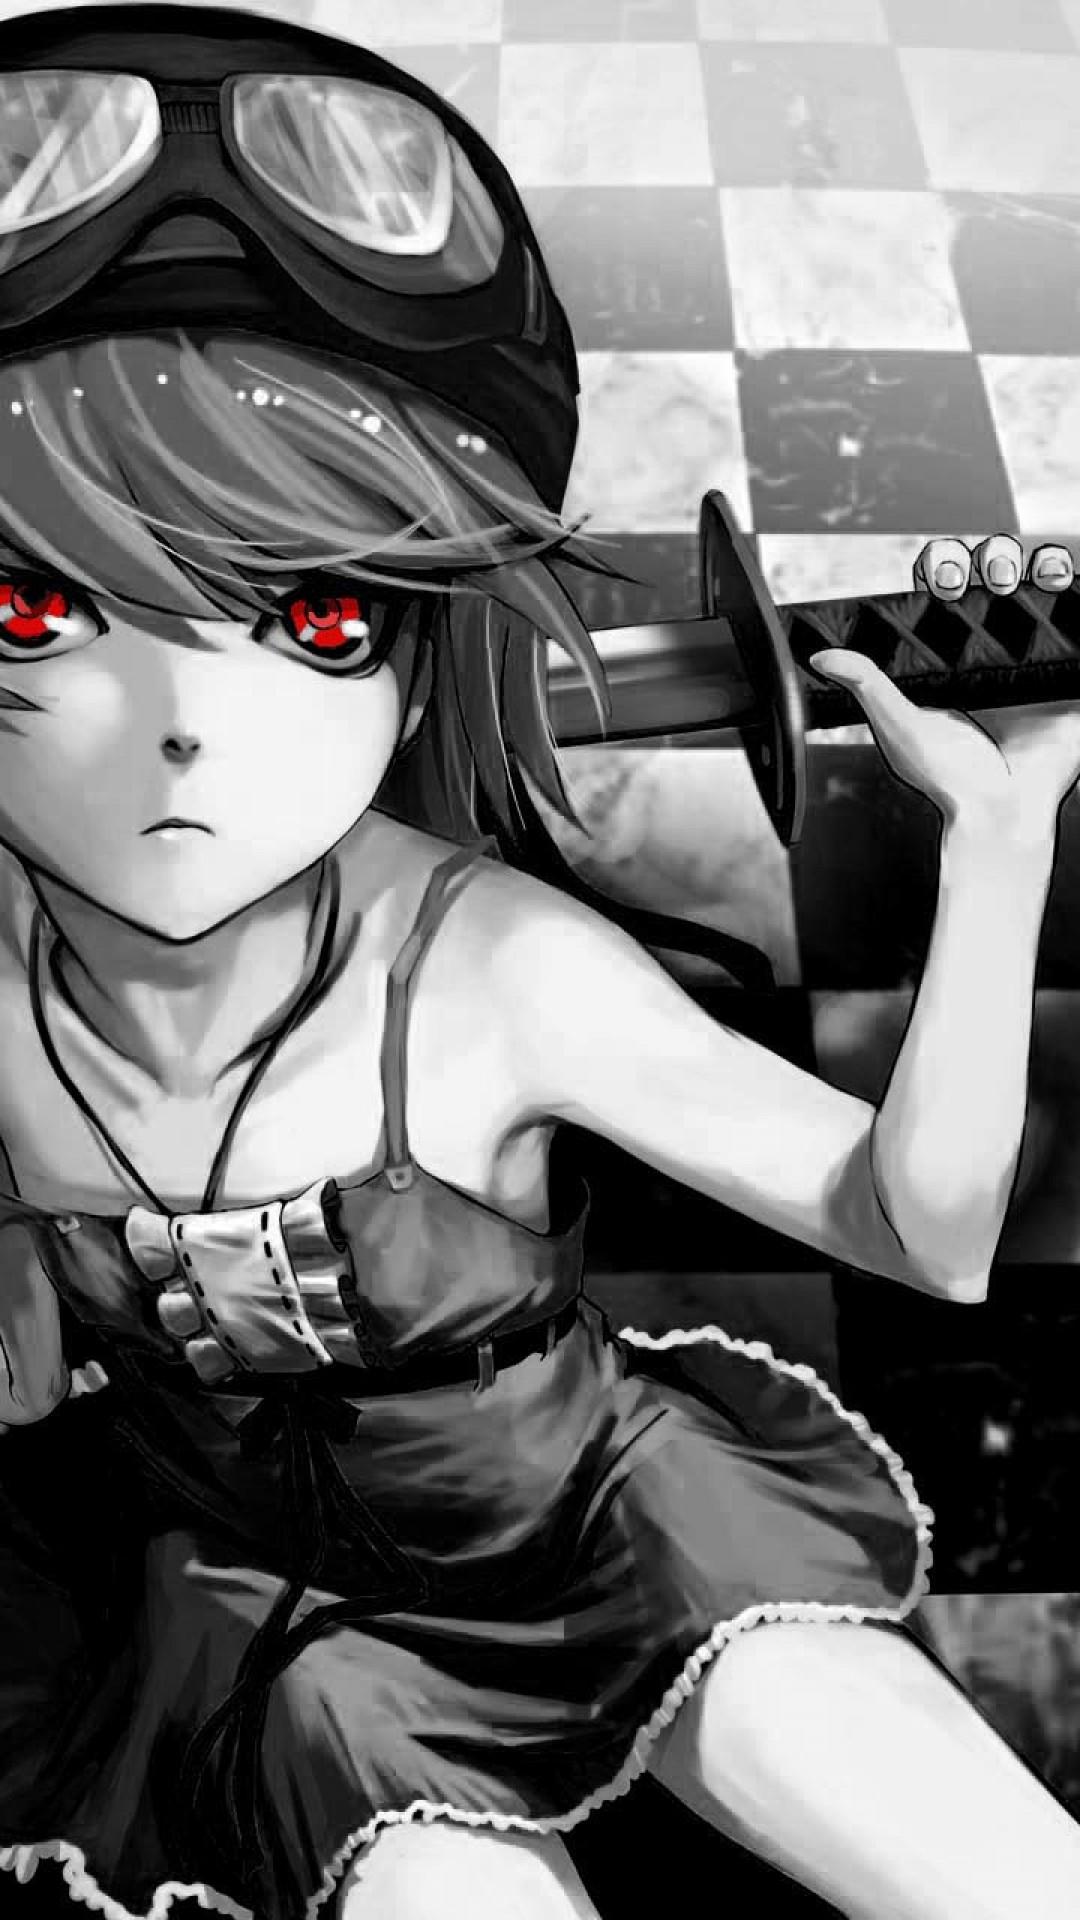 Black And White Anime Girl With Sword Wallpaper for Desktop and Mobiles iPhone 6 / 6S Plus